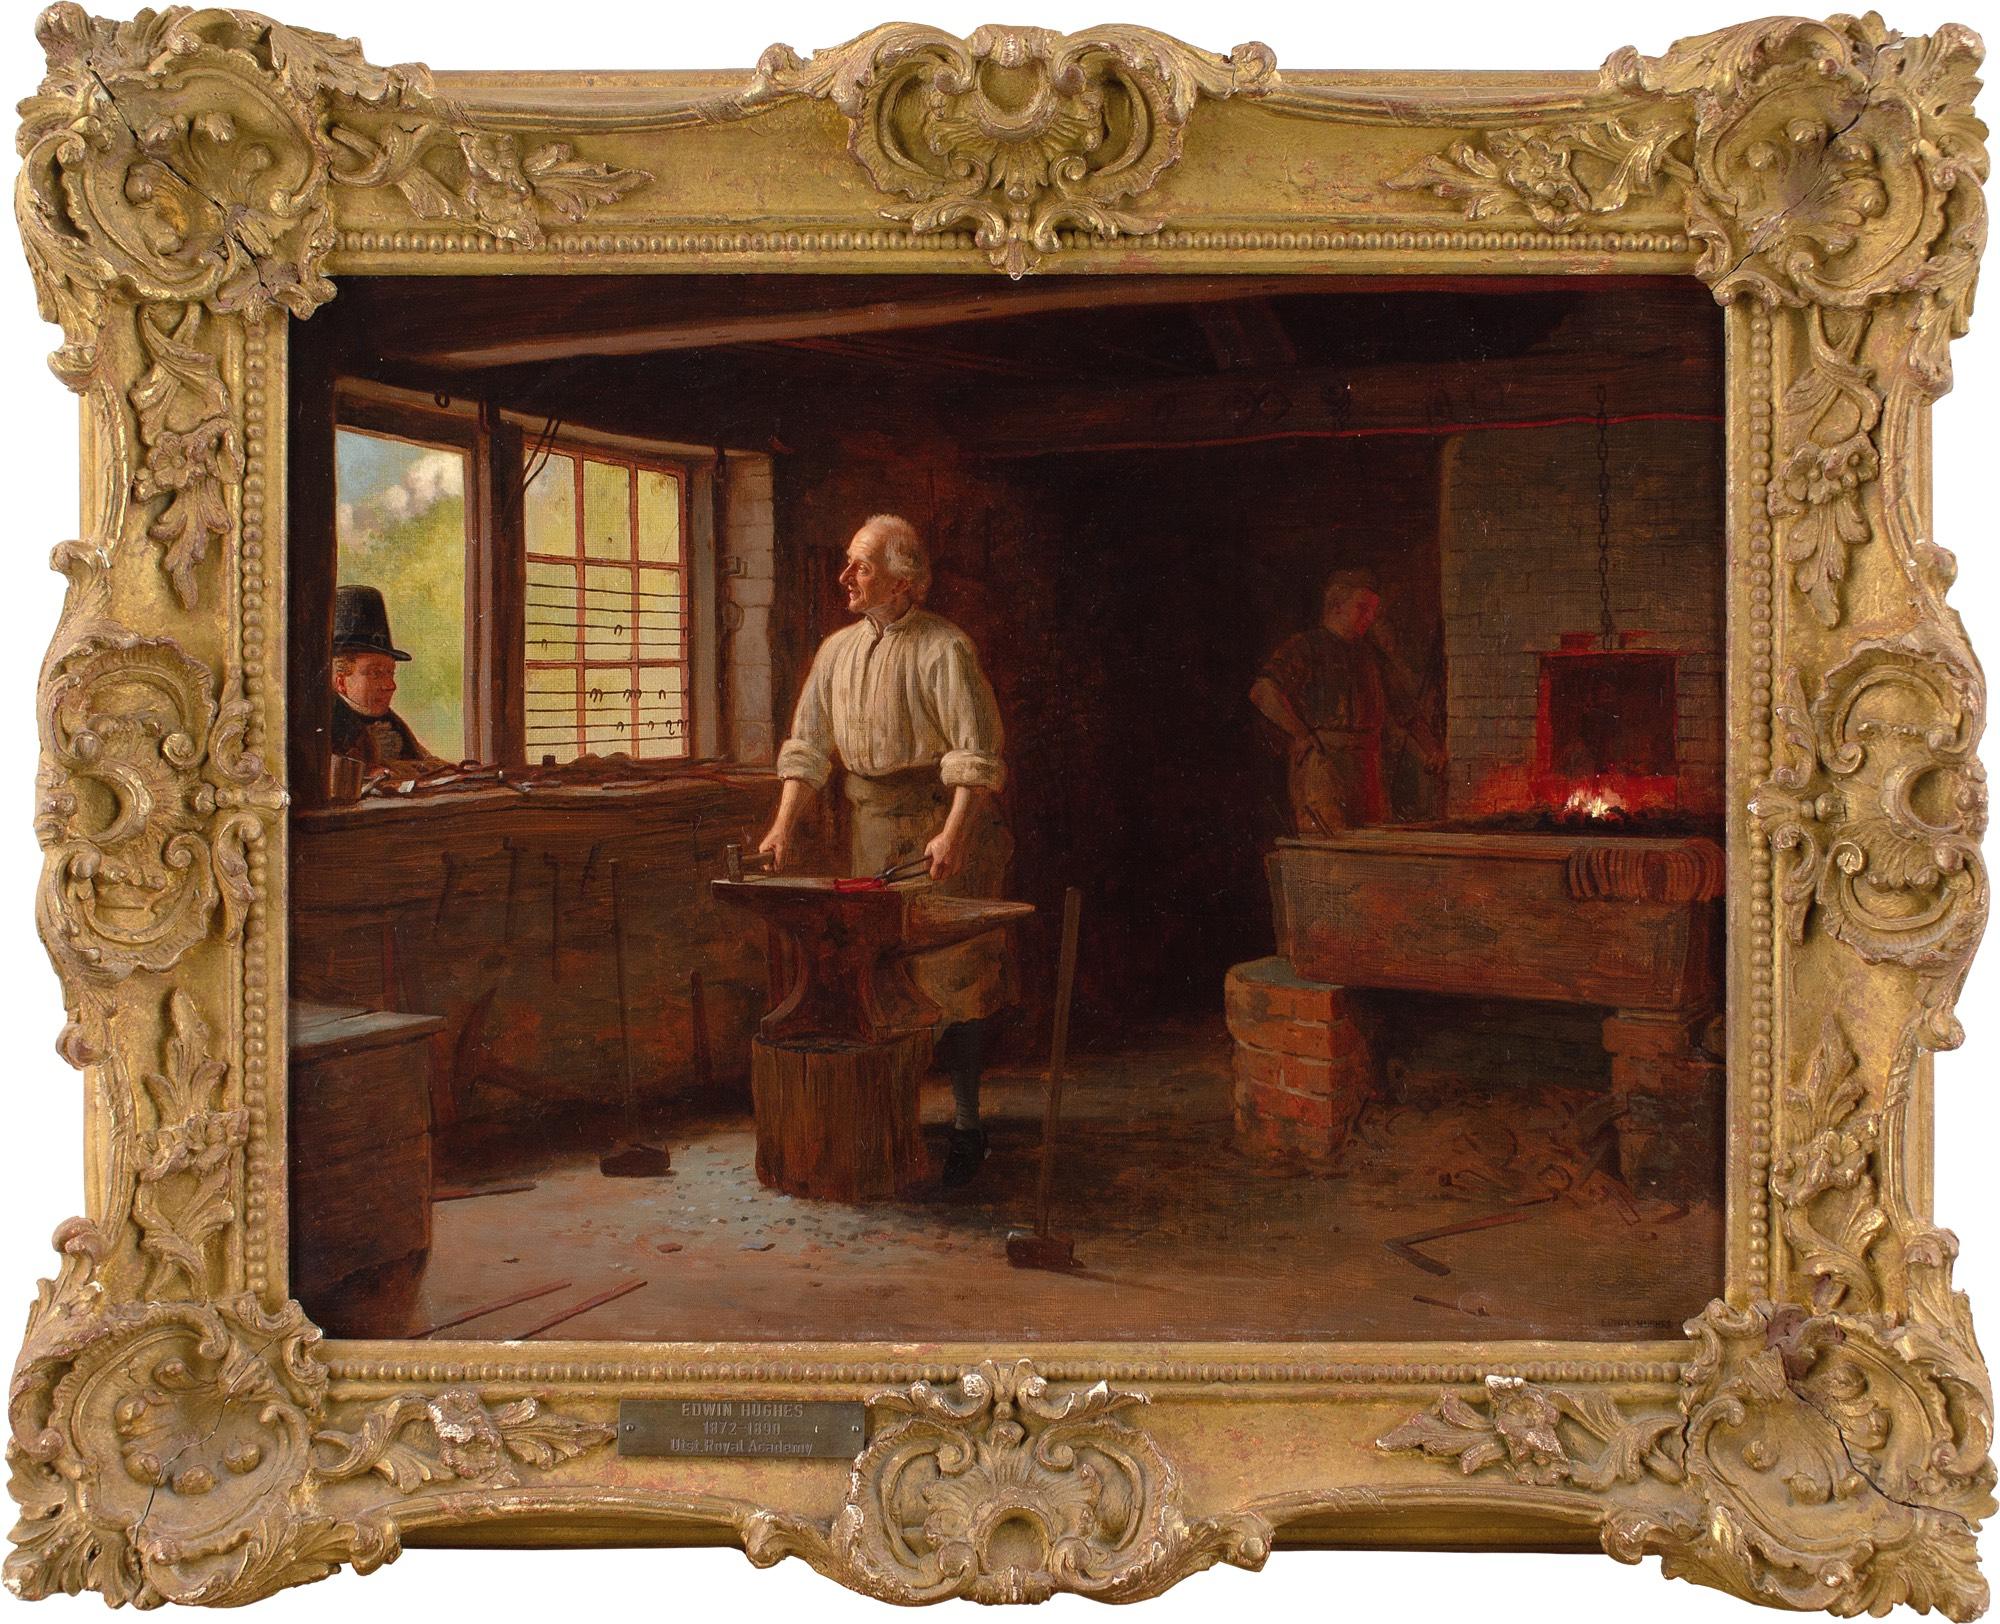 This late 19th-century oil painting by British artist Edwin Hughes (1842-1922) depicts a blacksmith holding a horseshoe while conversing with a gentleman through a window. His assistant works at the forge.

Edwin Hughes was an accomplished genre